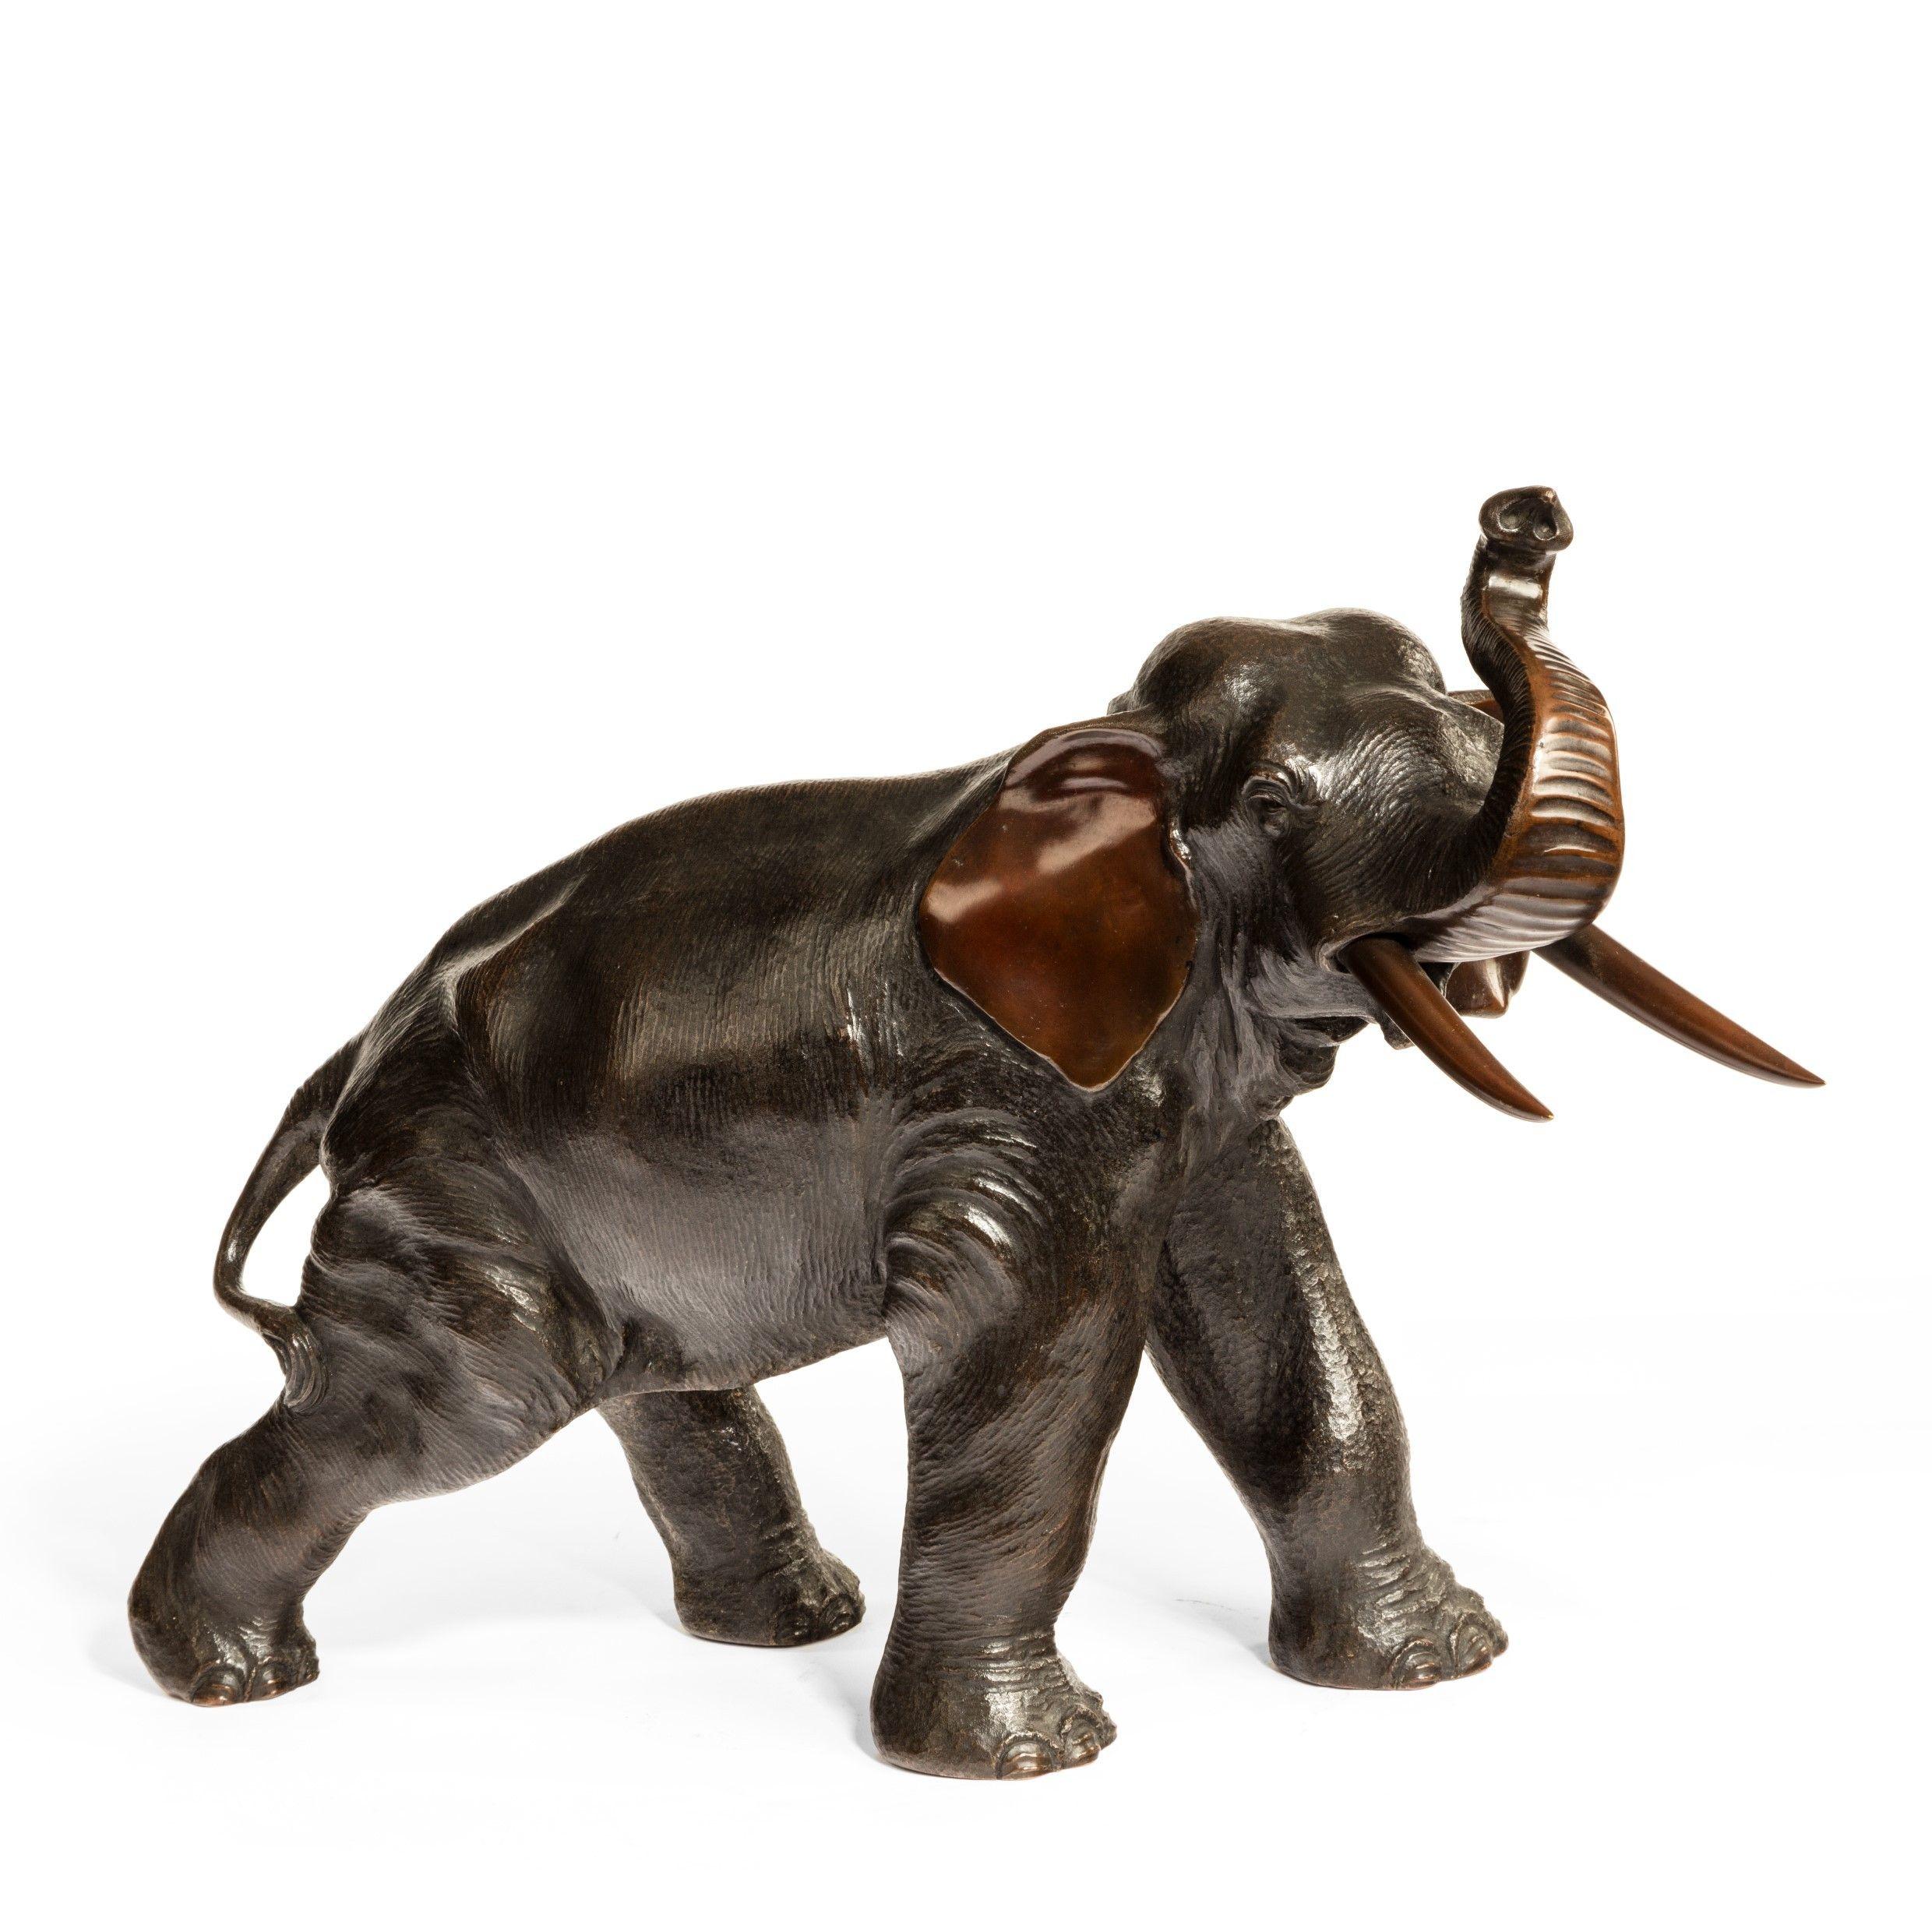 A Meiji period bronze elephant by Genryusai Seiya, the powerful animal striding forward with trunk raised, the insides of the ears, trunk and tusks patinated reddish brown, on a rootwood base, signed in a seal ?????? Genryusai Seiya zo [Made by